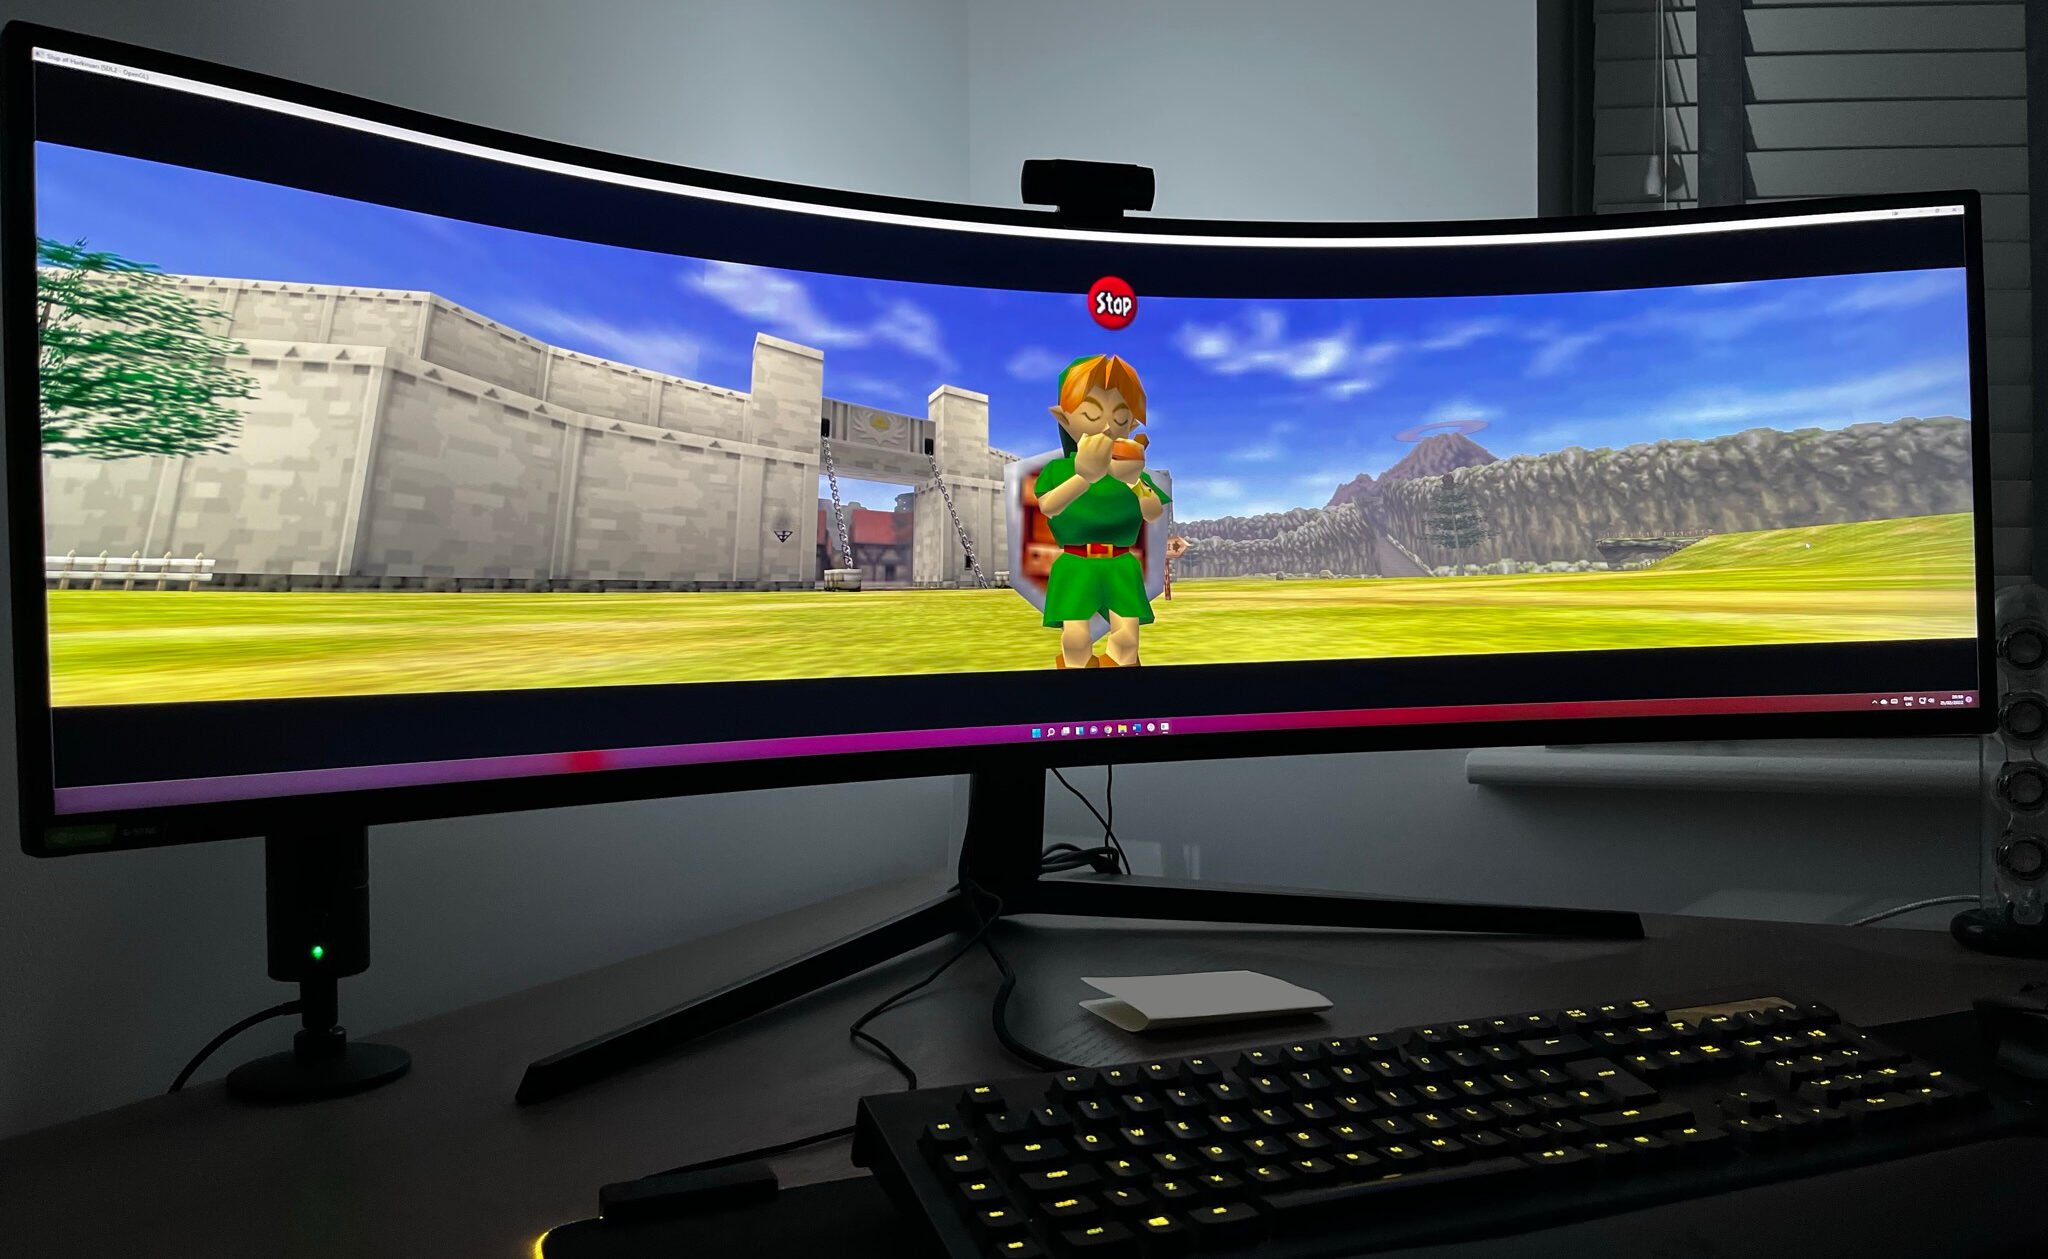 There Are Already Mods For The Zelda: Ocarina Of Time PC Port